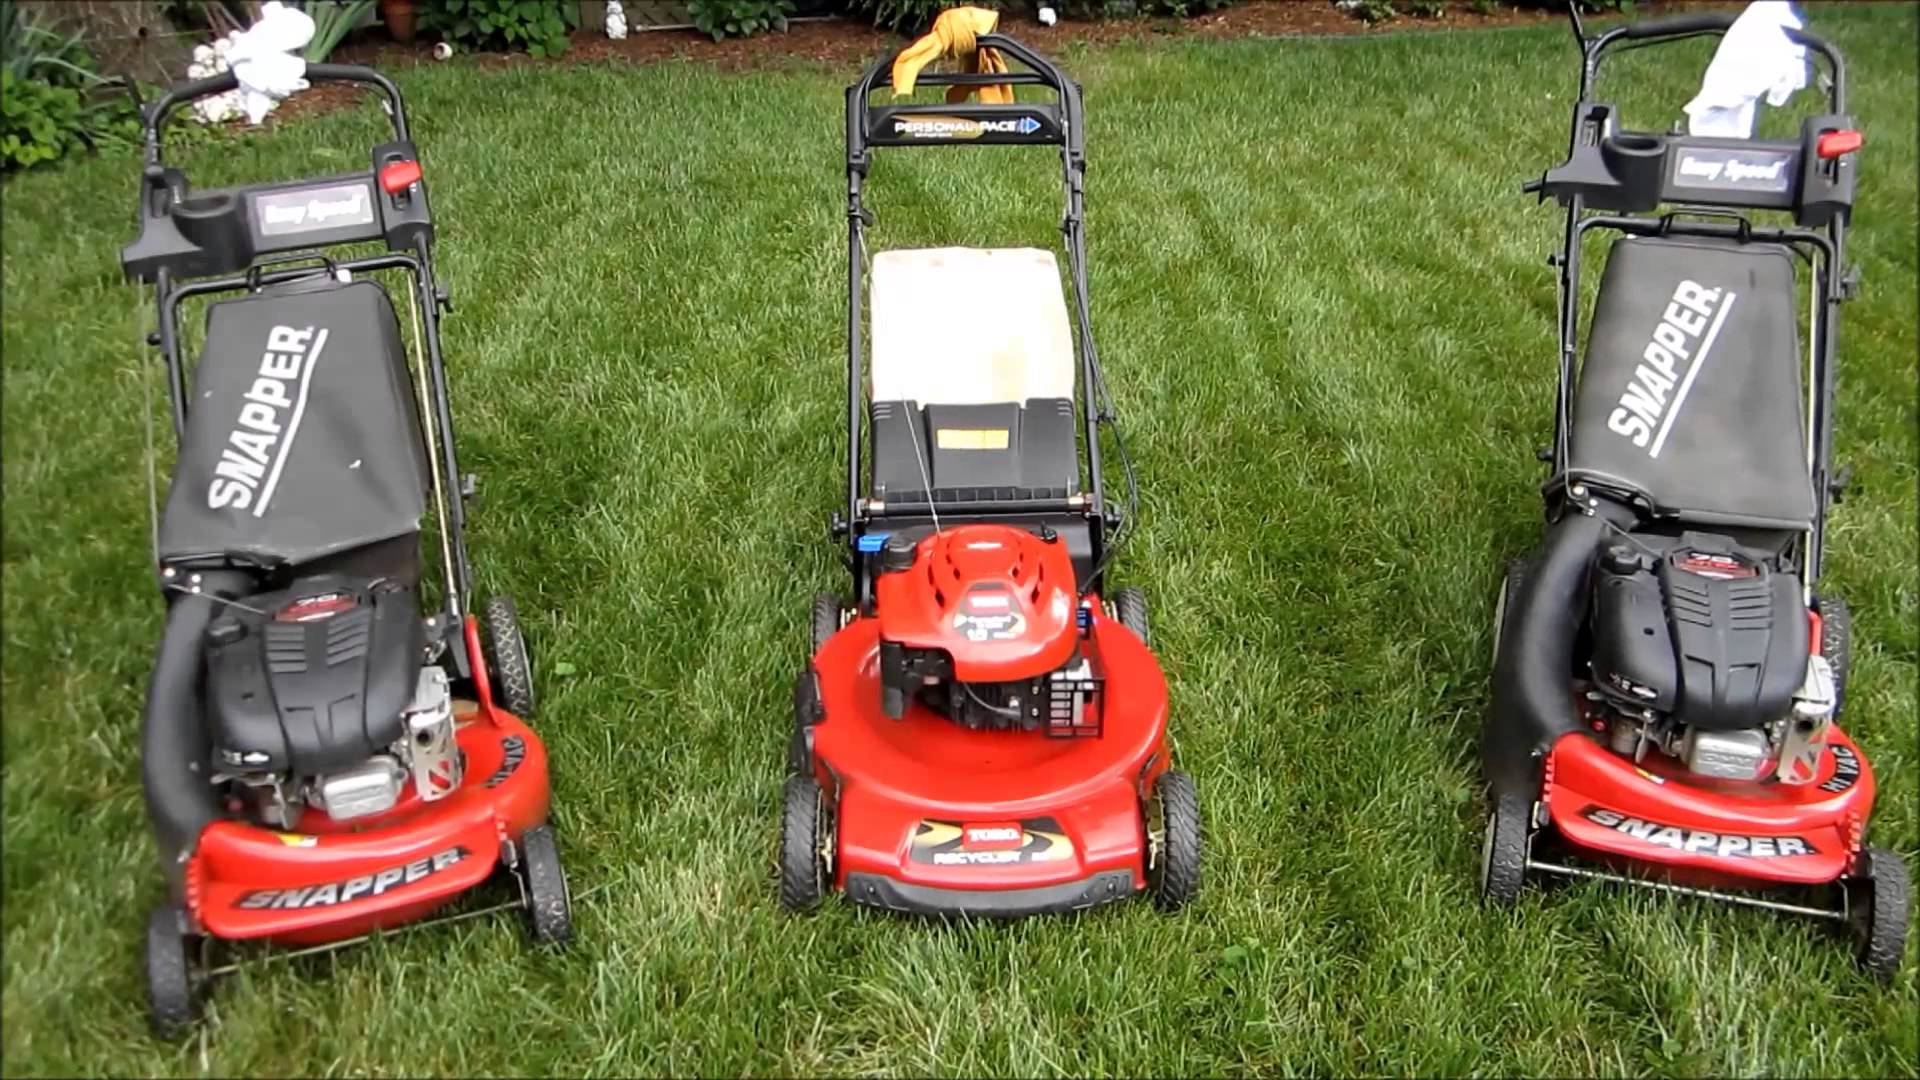 What are some popular lawn mowers?